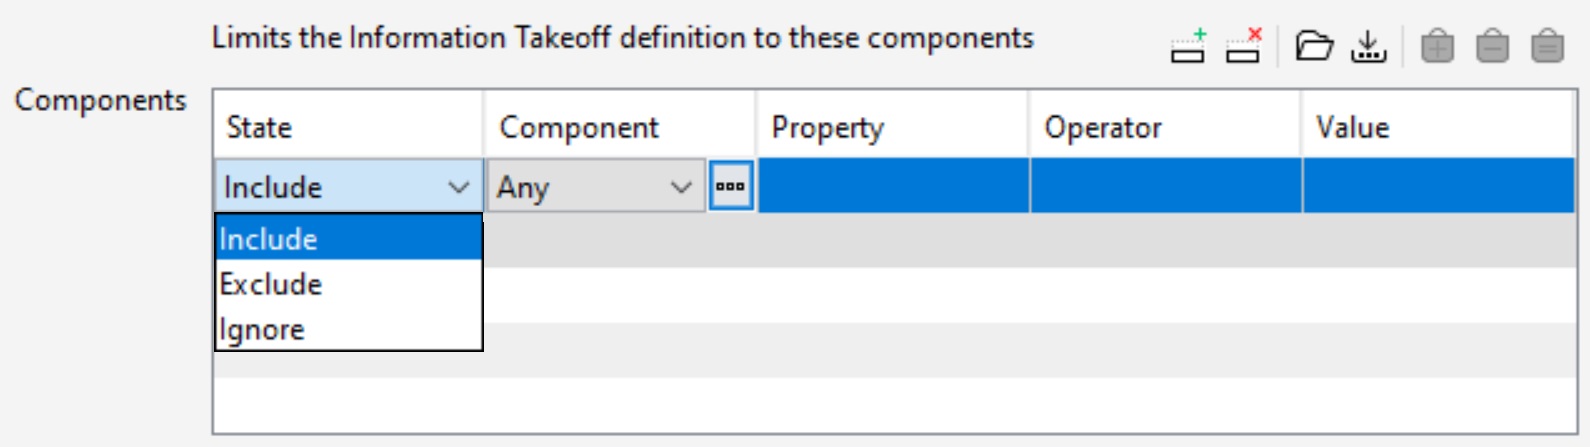 ito_definition_components